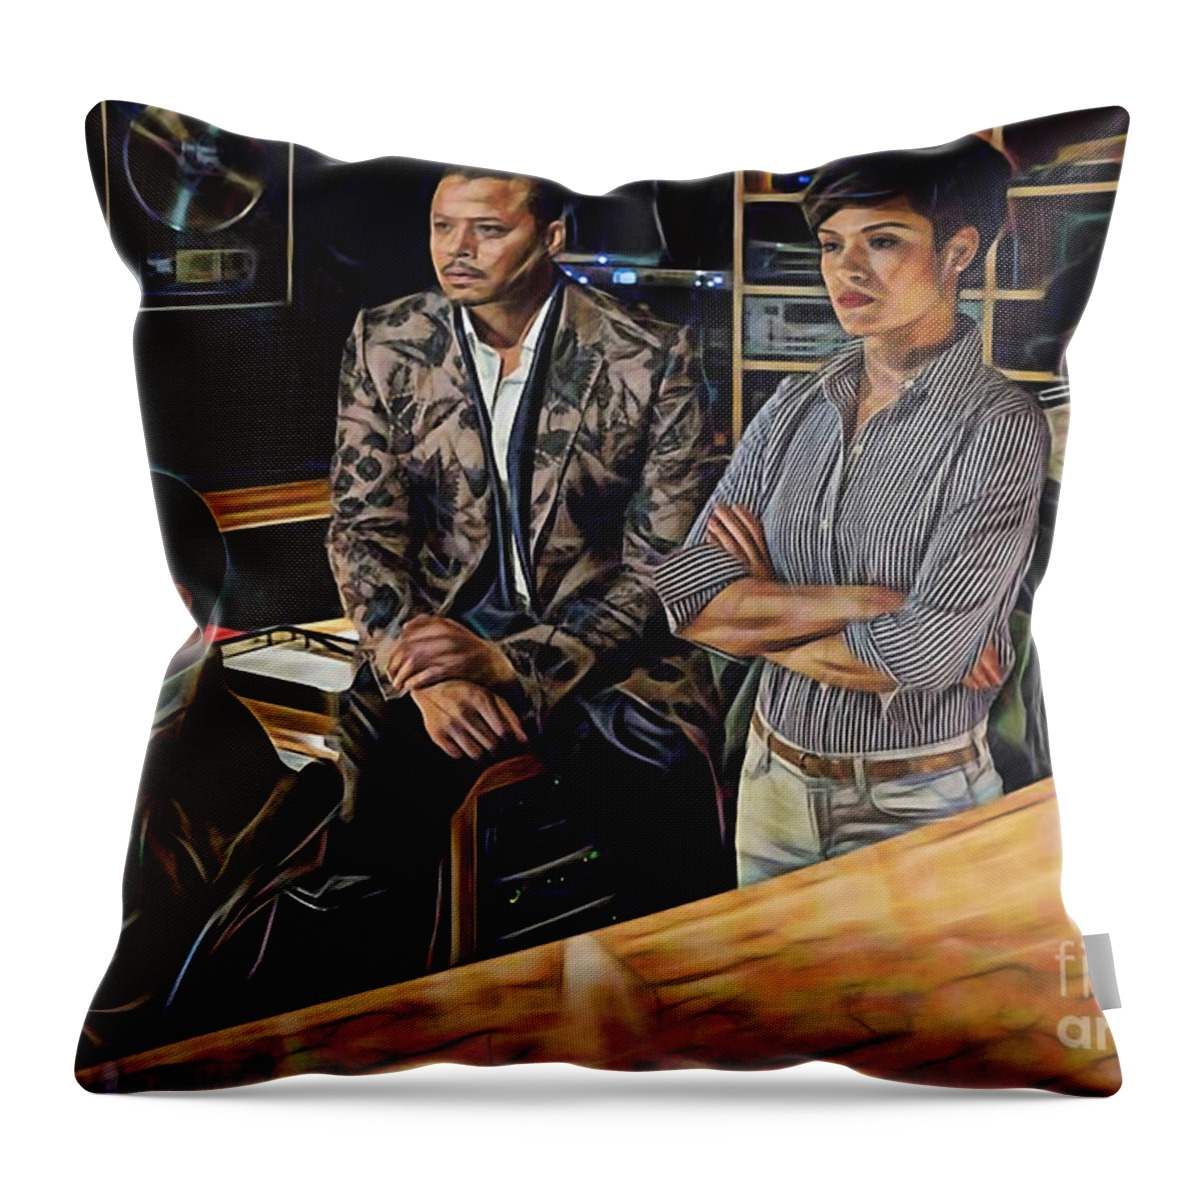 Terrence Howard Throw Pillow featuring the mixed media Empire by Marvin Blaine